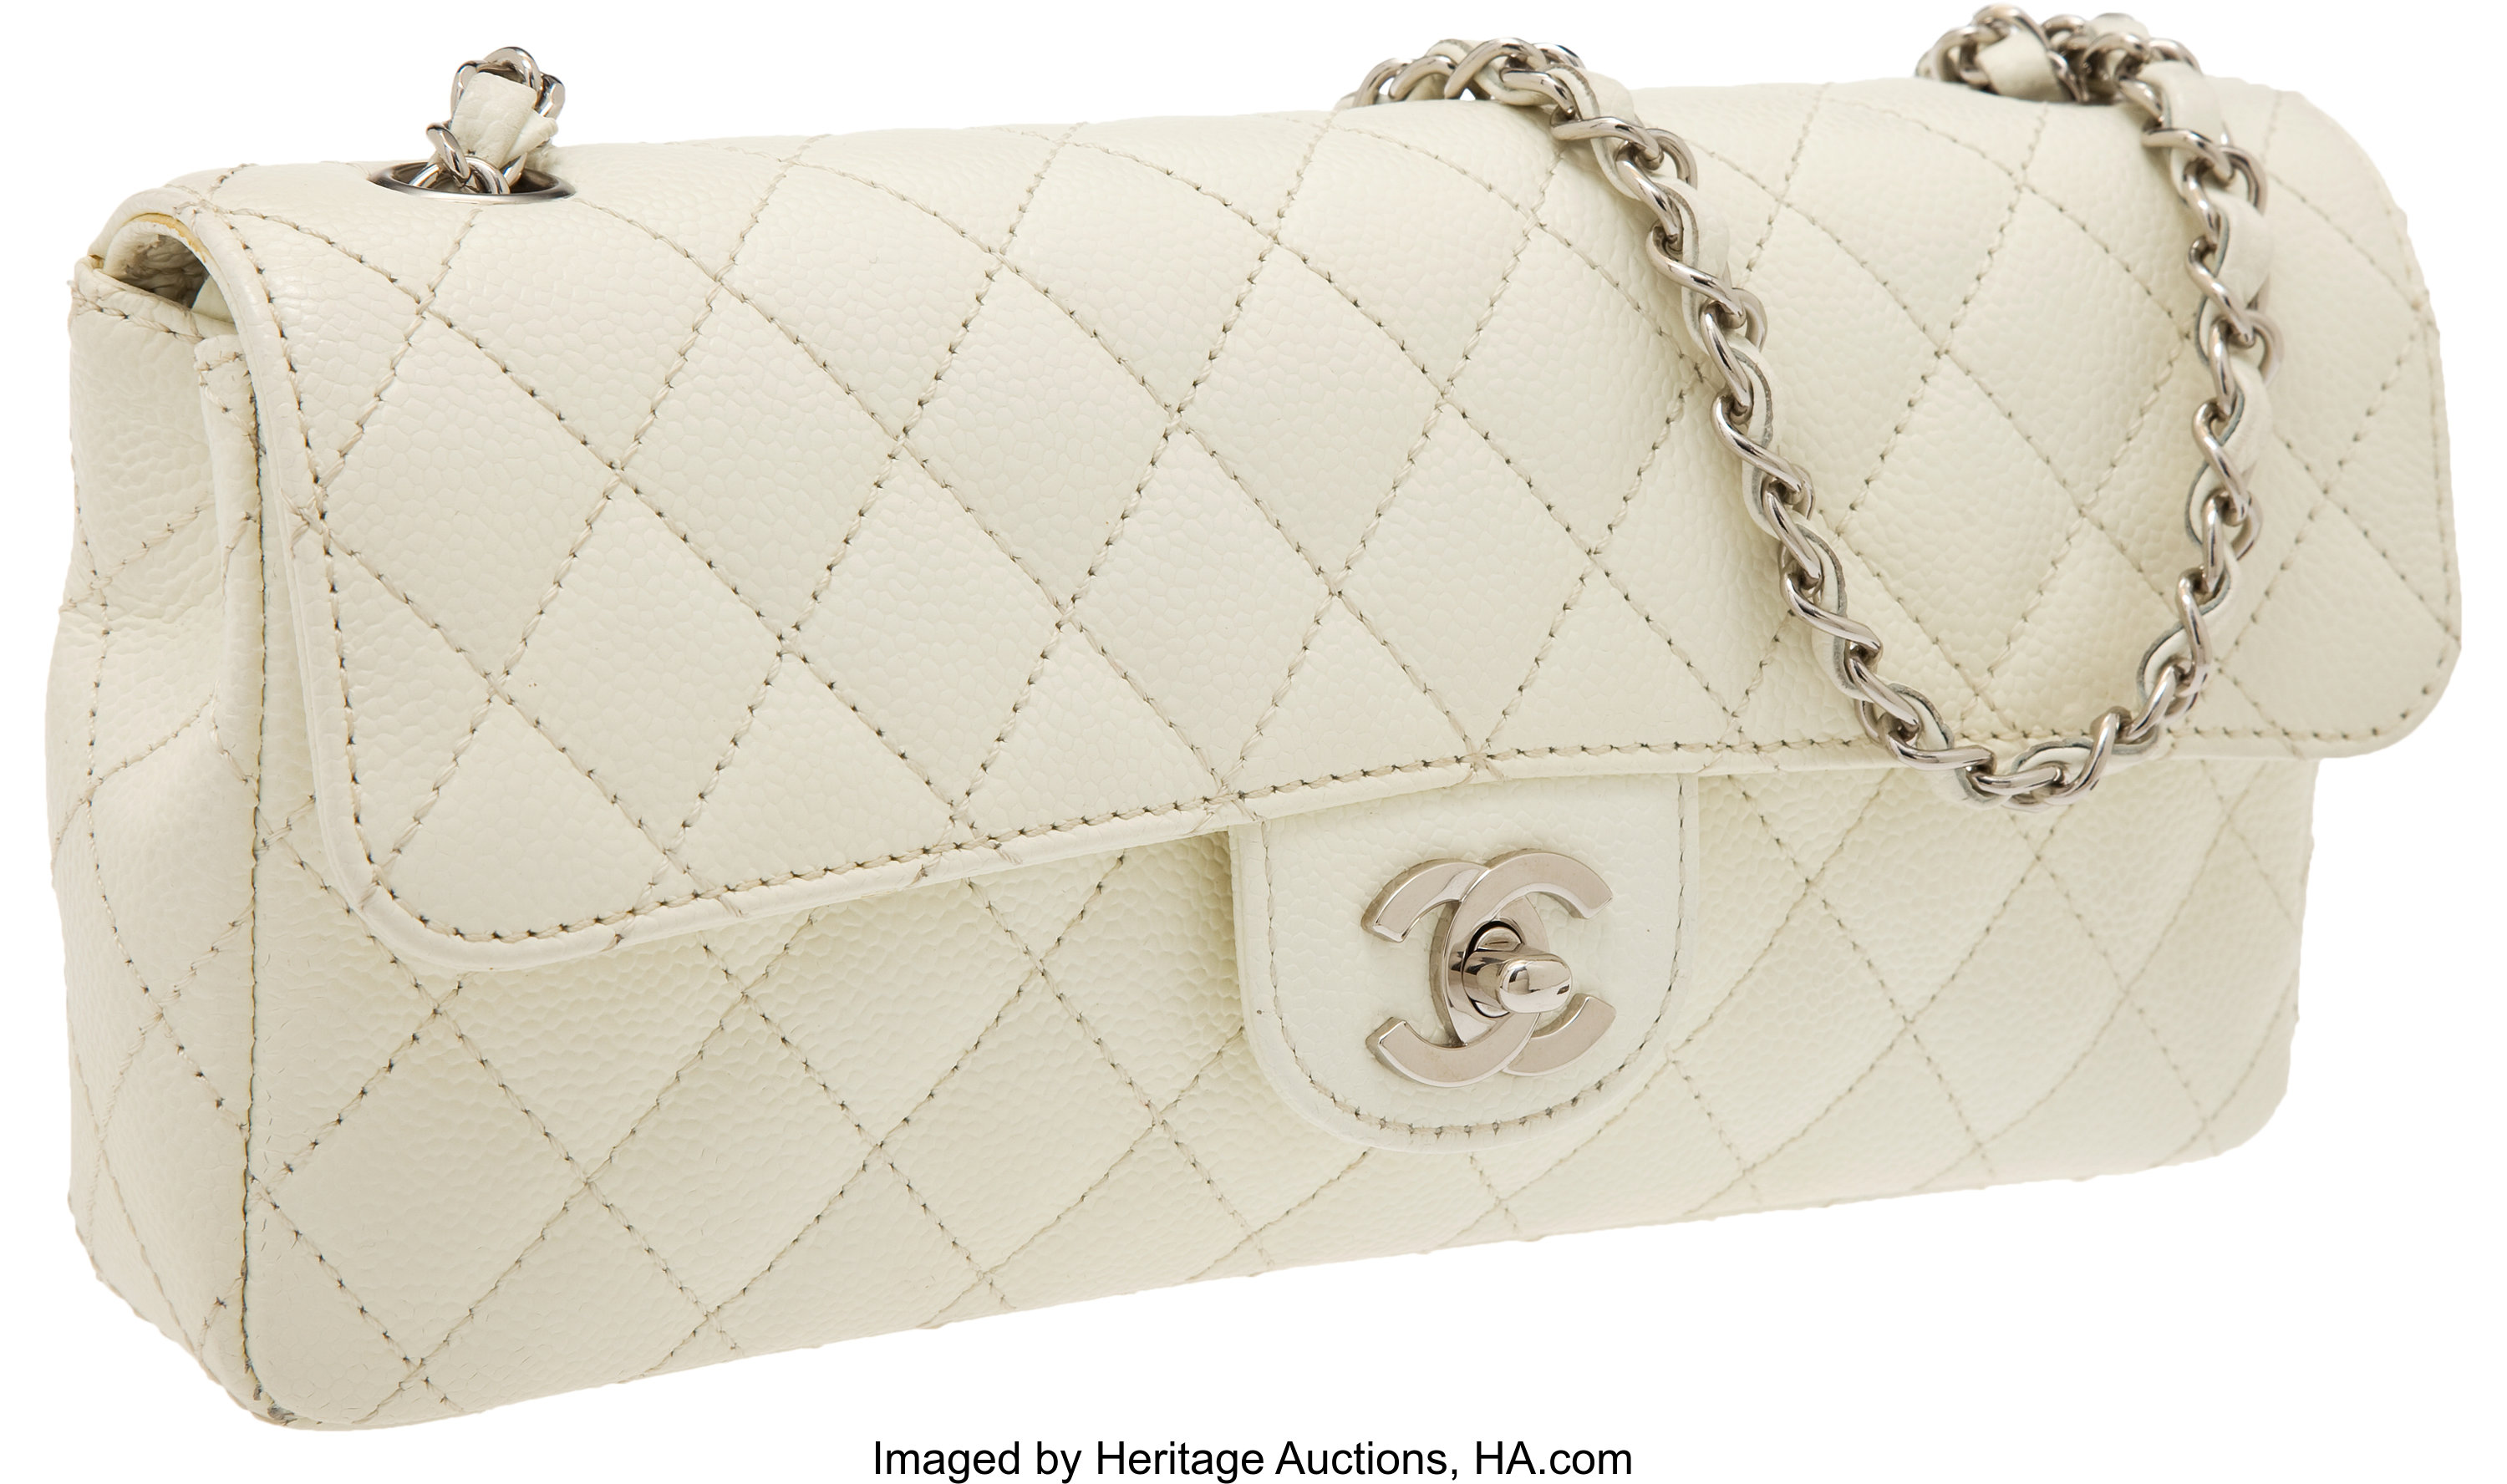 Chanel White Caviar Leather East-West Single Flap Bag with Silver